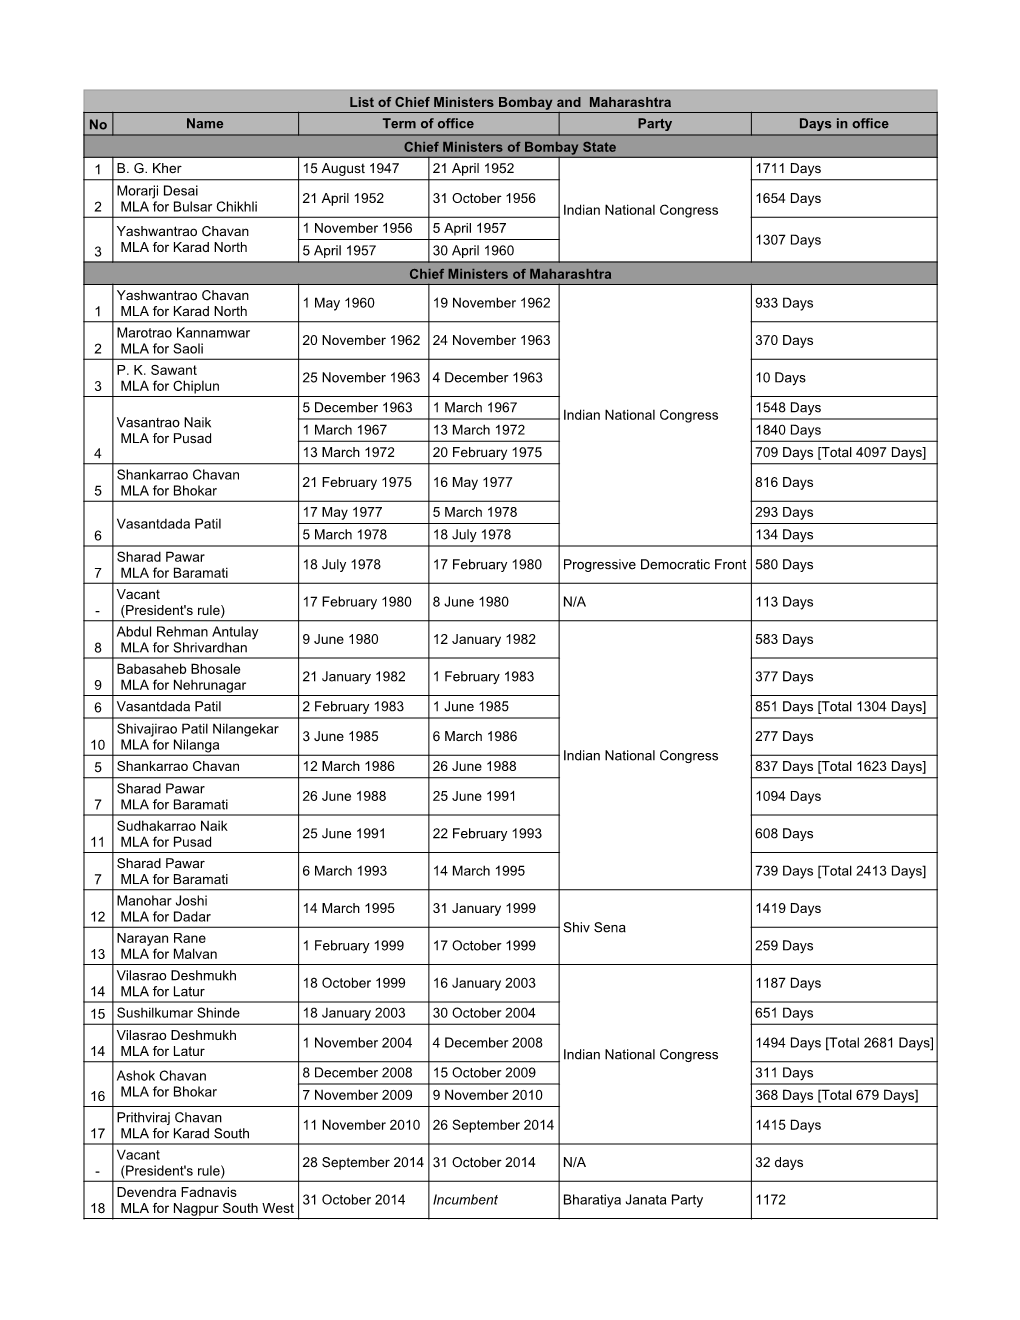 List of Chief Ministers Bombay and Maharashtra No Name Term of Office Party Days in Office Chief Ministers of Bombay State 1 B. G